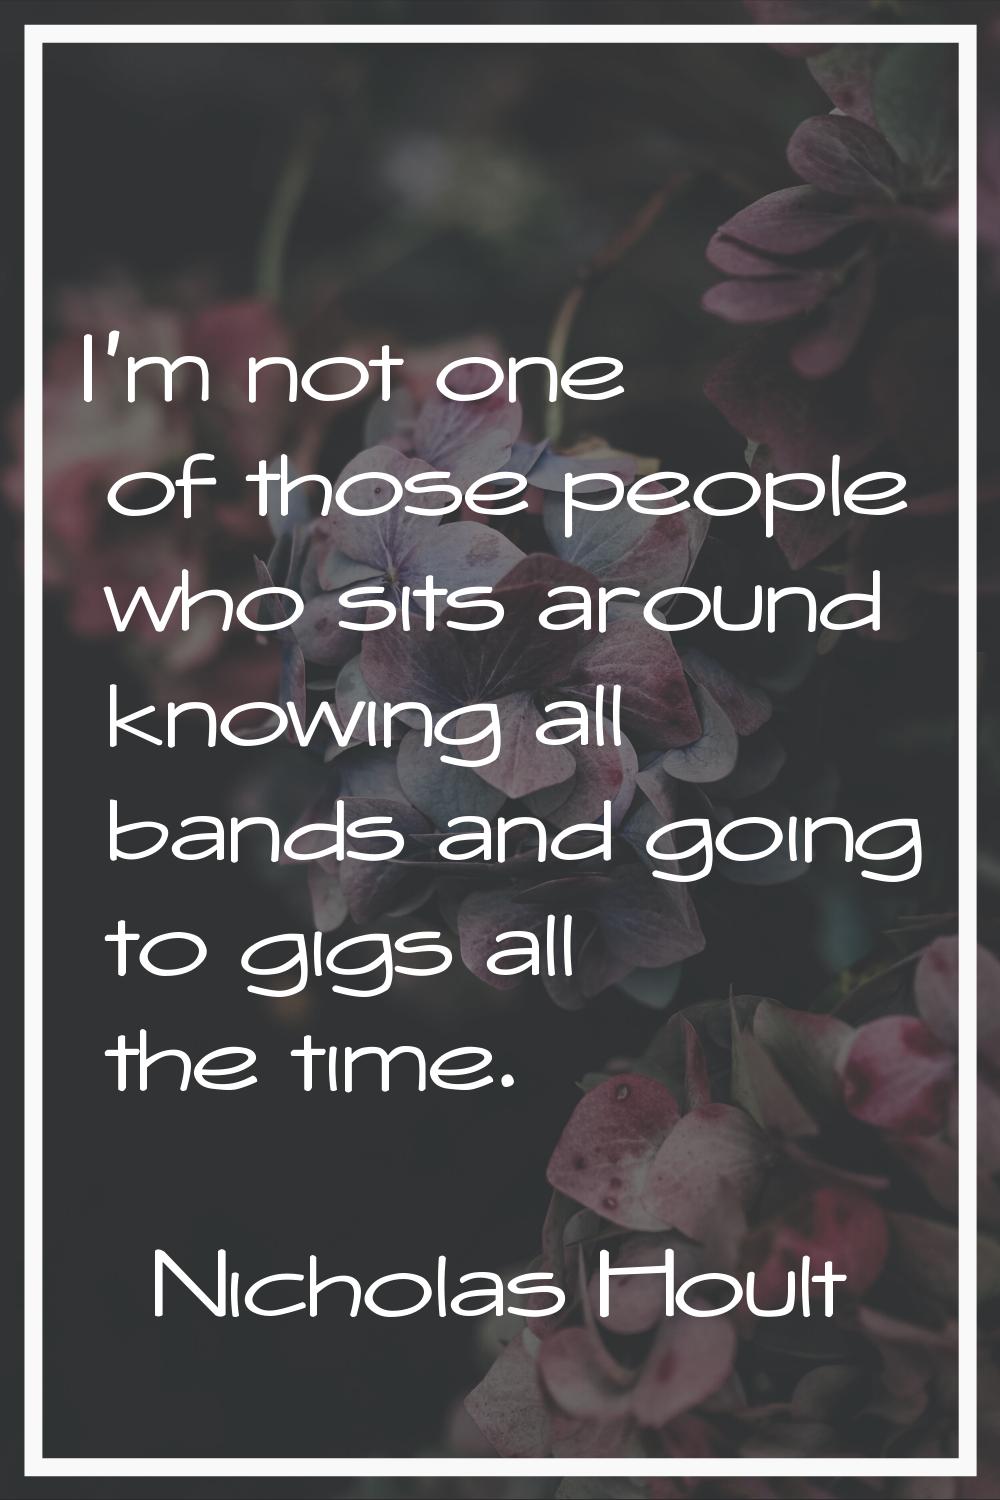 I'm not one of those people who sits around knowing all bands and going to gigs all the time.